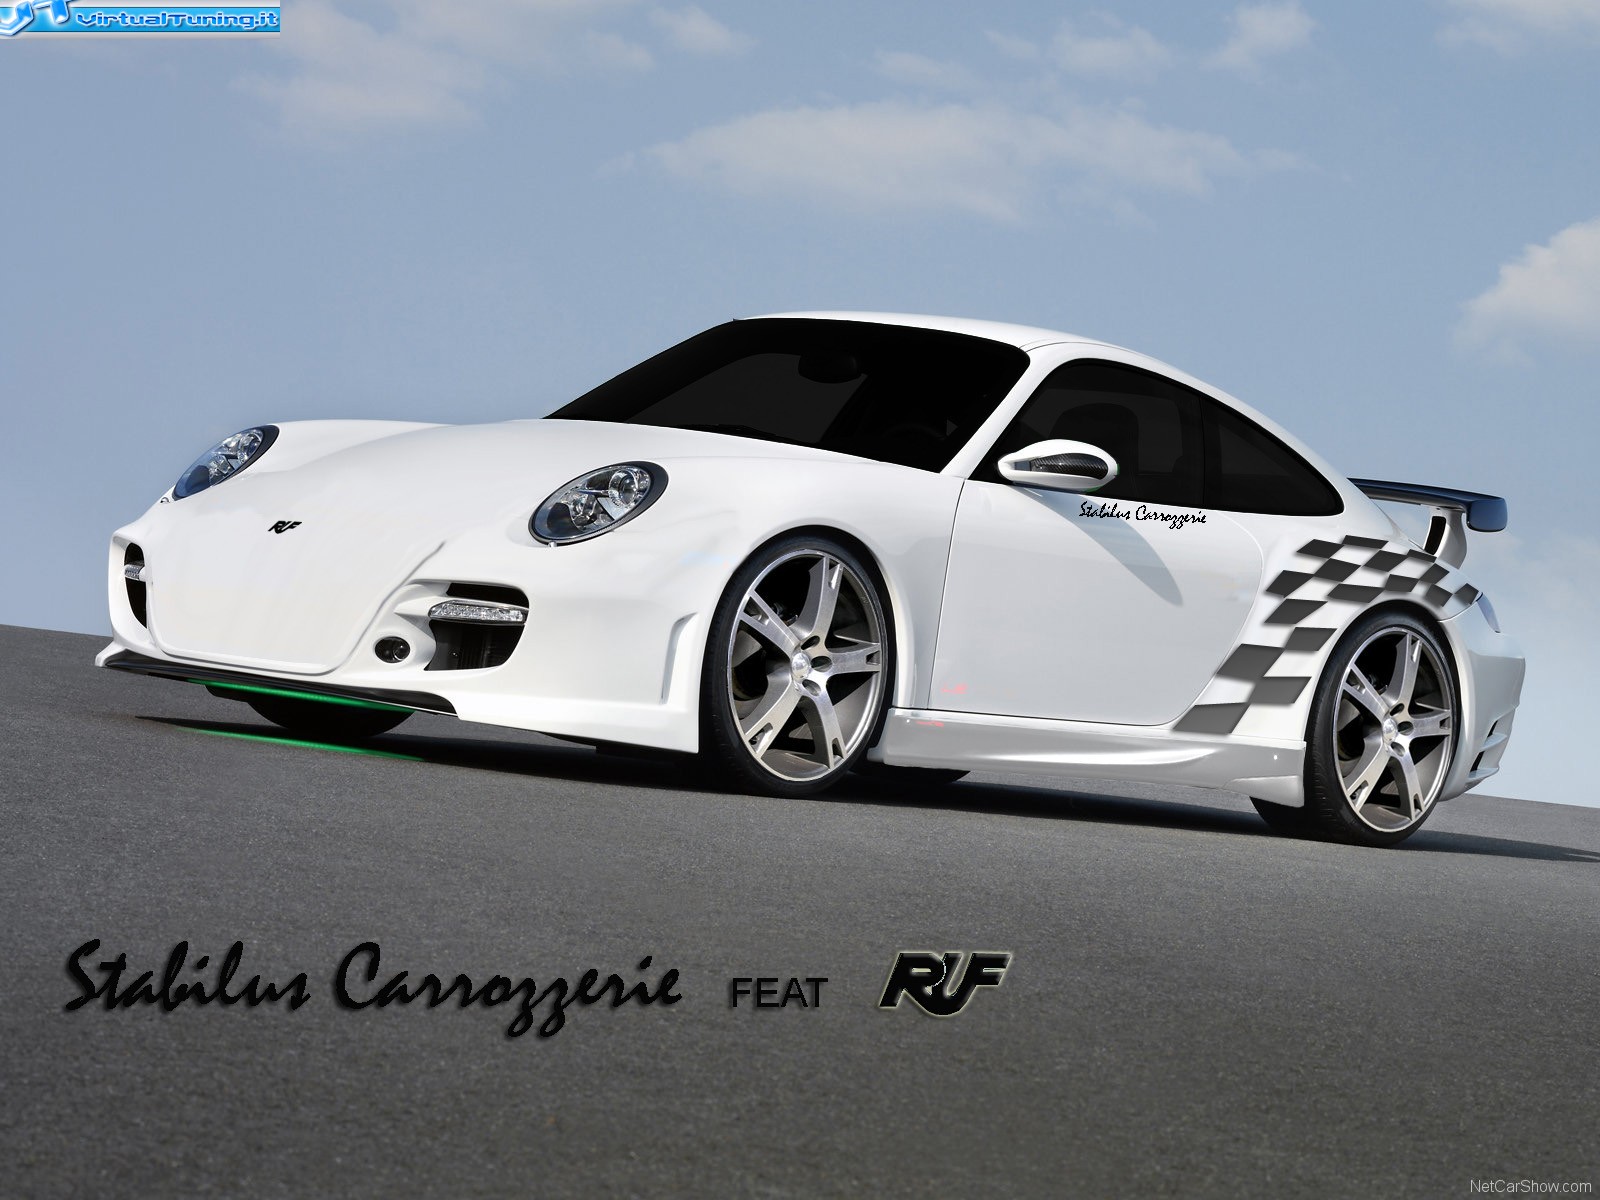 VirtualTuning RINSPEED 997 turbo LE MANS by 